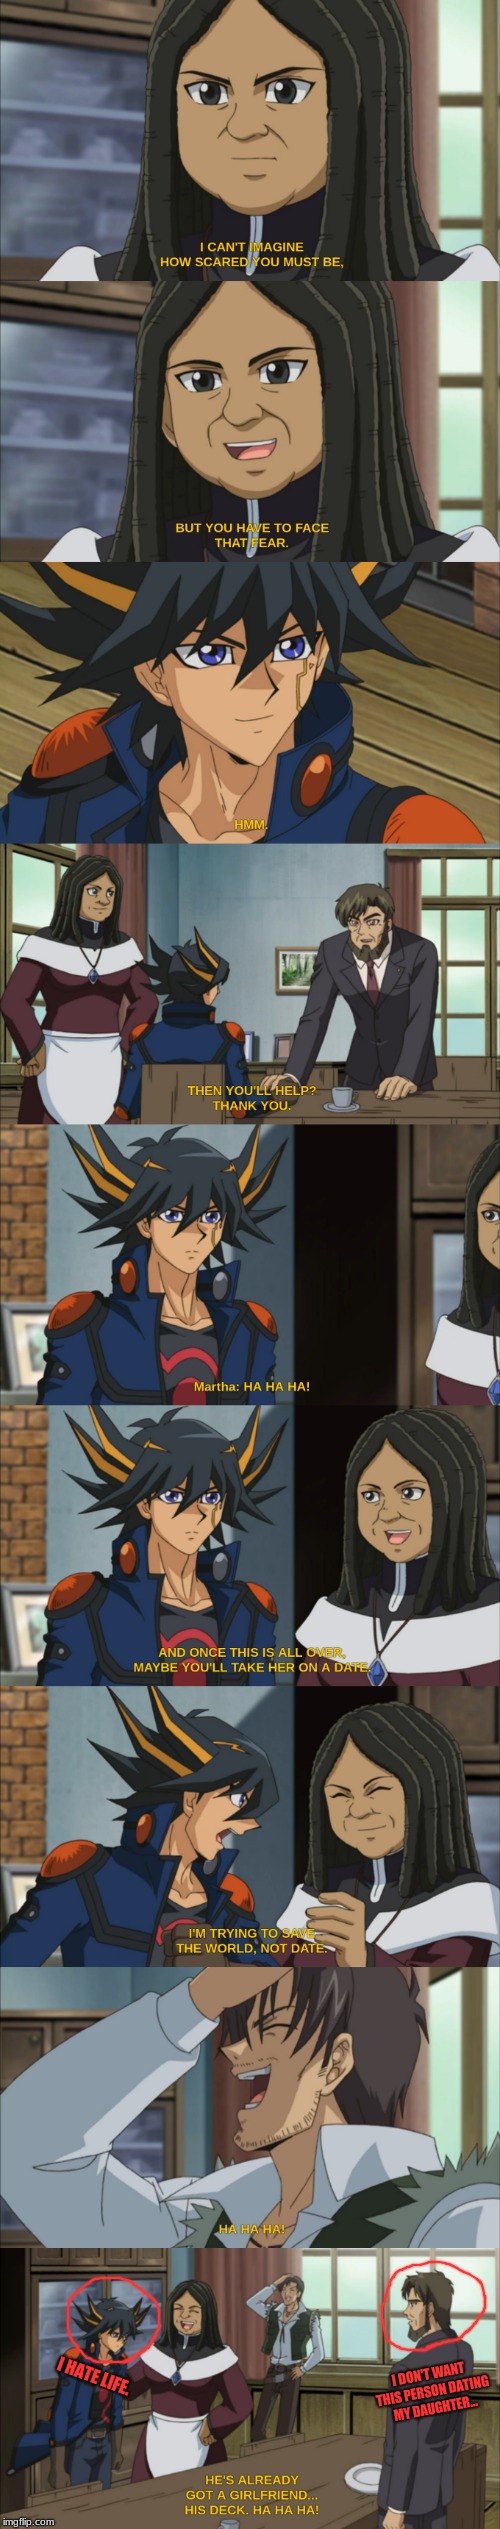 This is the funniest scene in the world, can't believe it took so long to make. (Sorry I've been busy!) | I DON'T WANT THIS PERSON DATING MY DAUGHTER... I HATE LIFE. | image tagged in memes,funny,yuseifudo,yusei x akiza | made w/ Imgflip meme maker